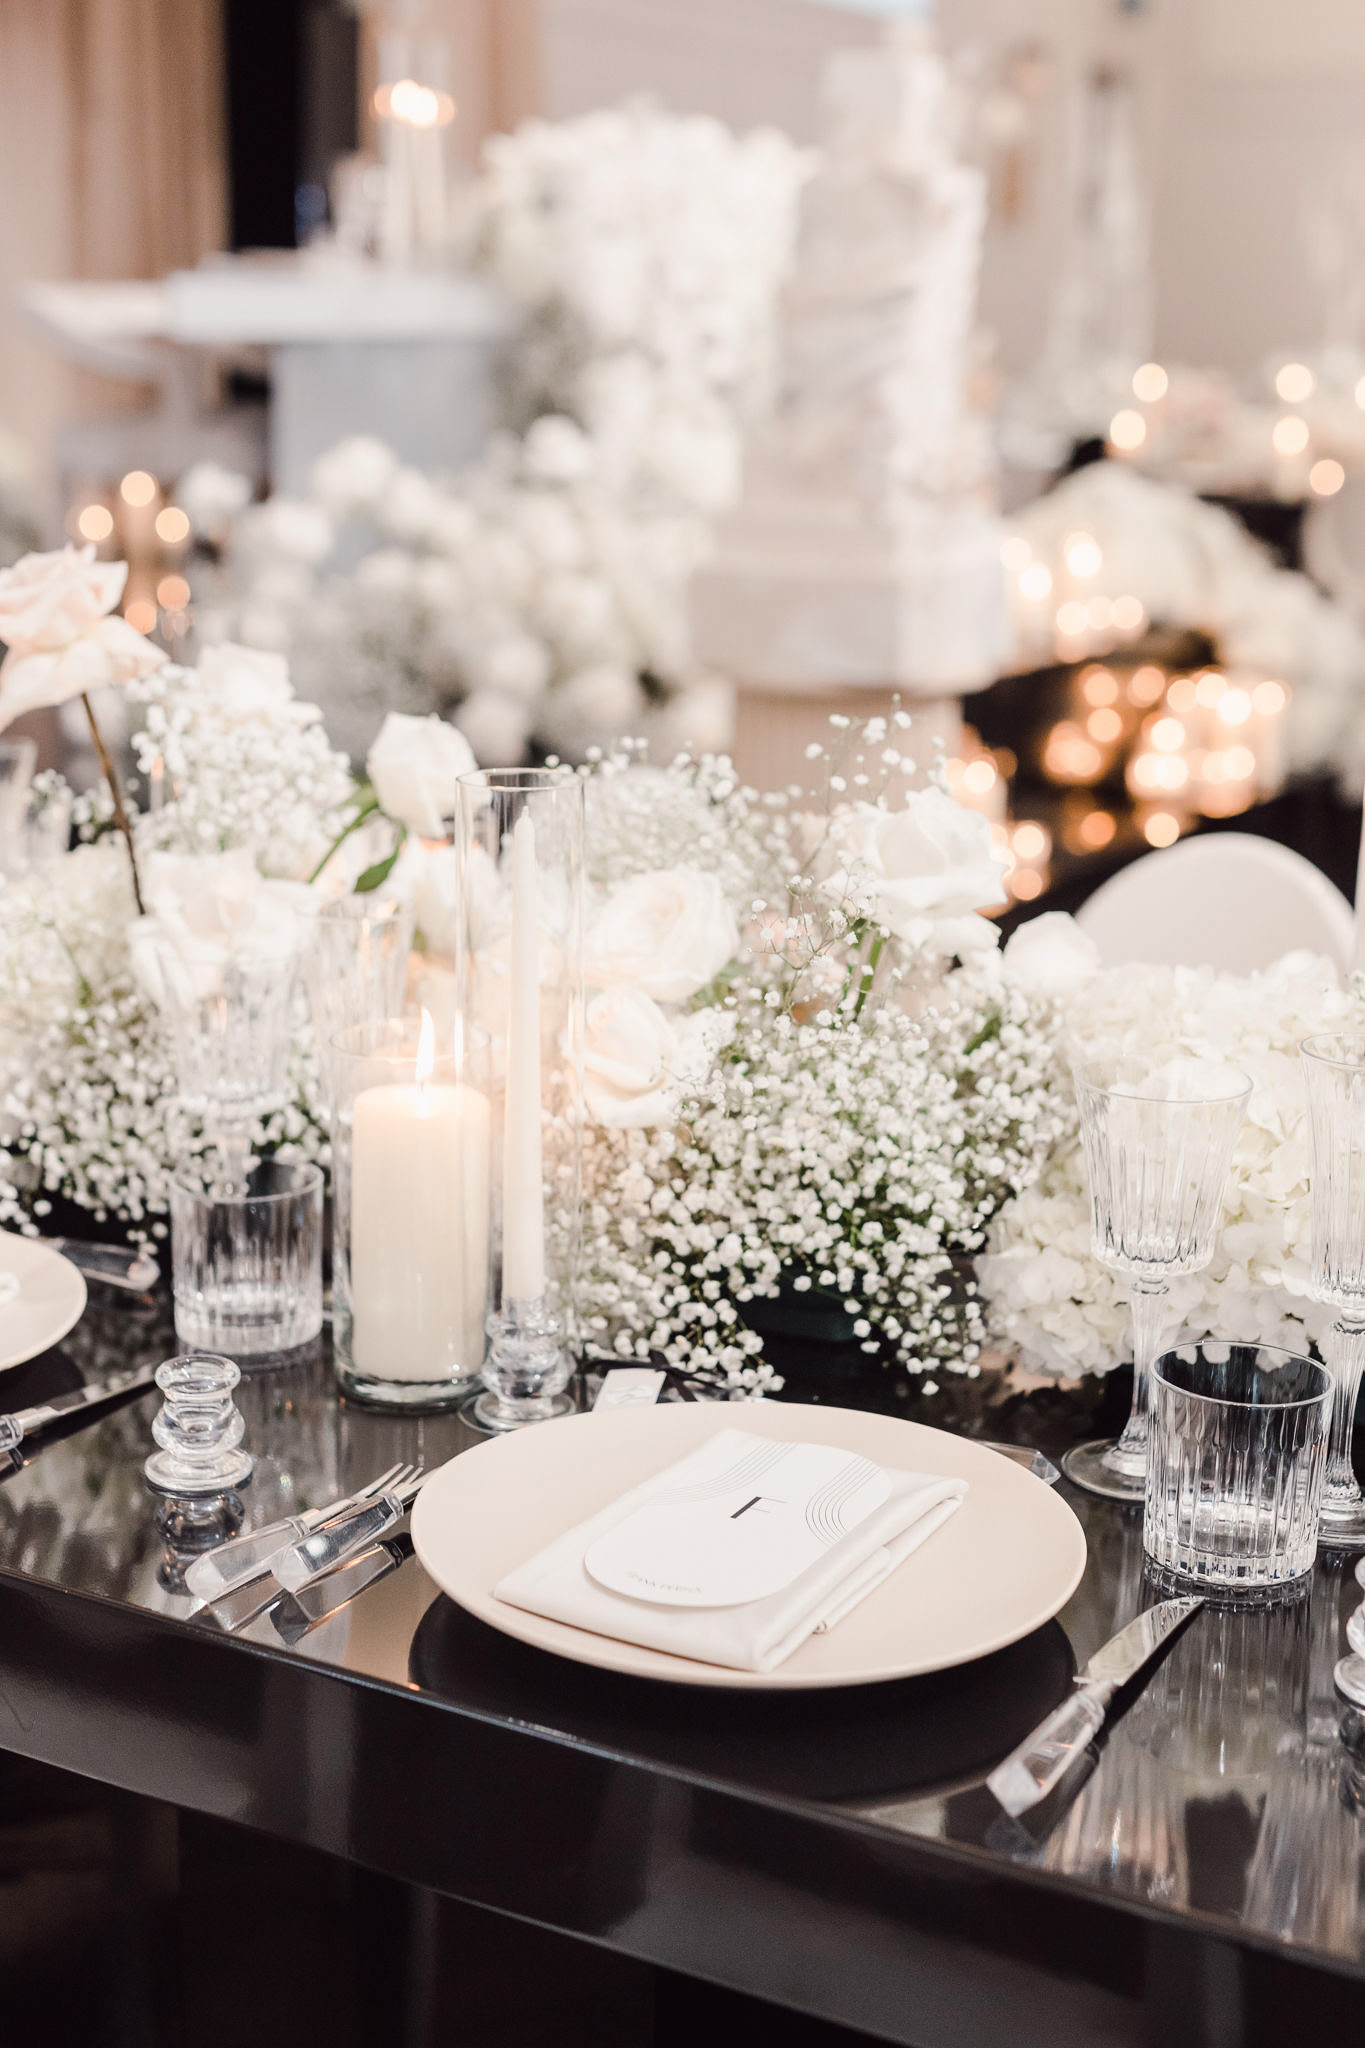 A black and white table setting with candles and baby's breath.